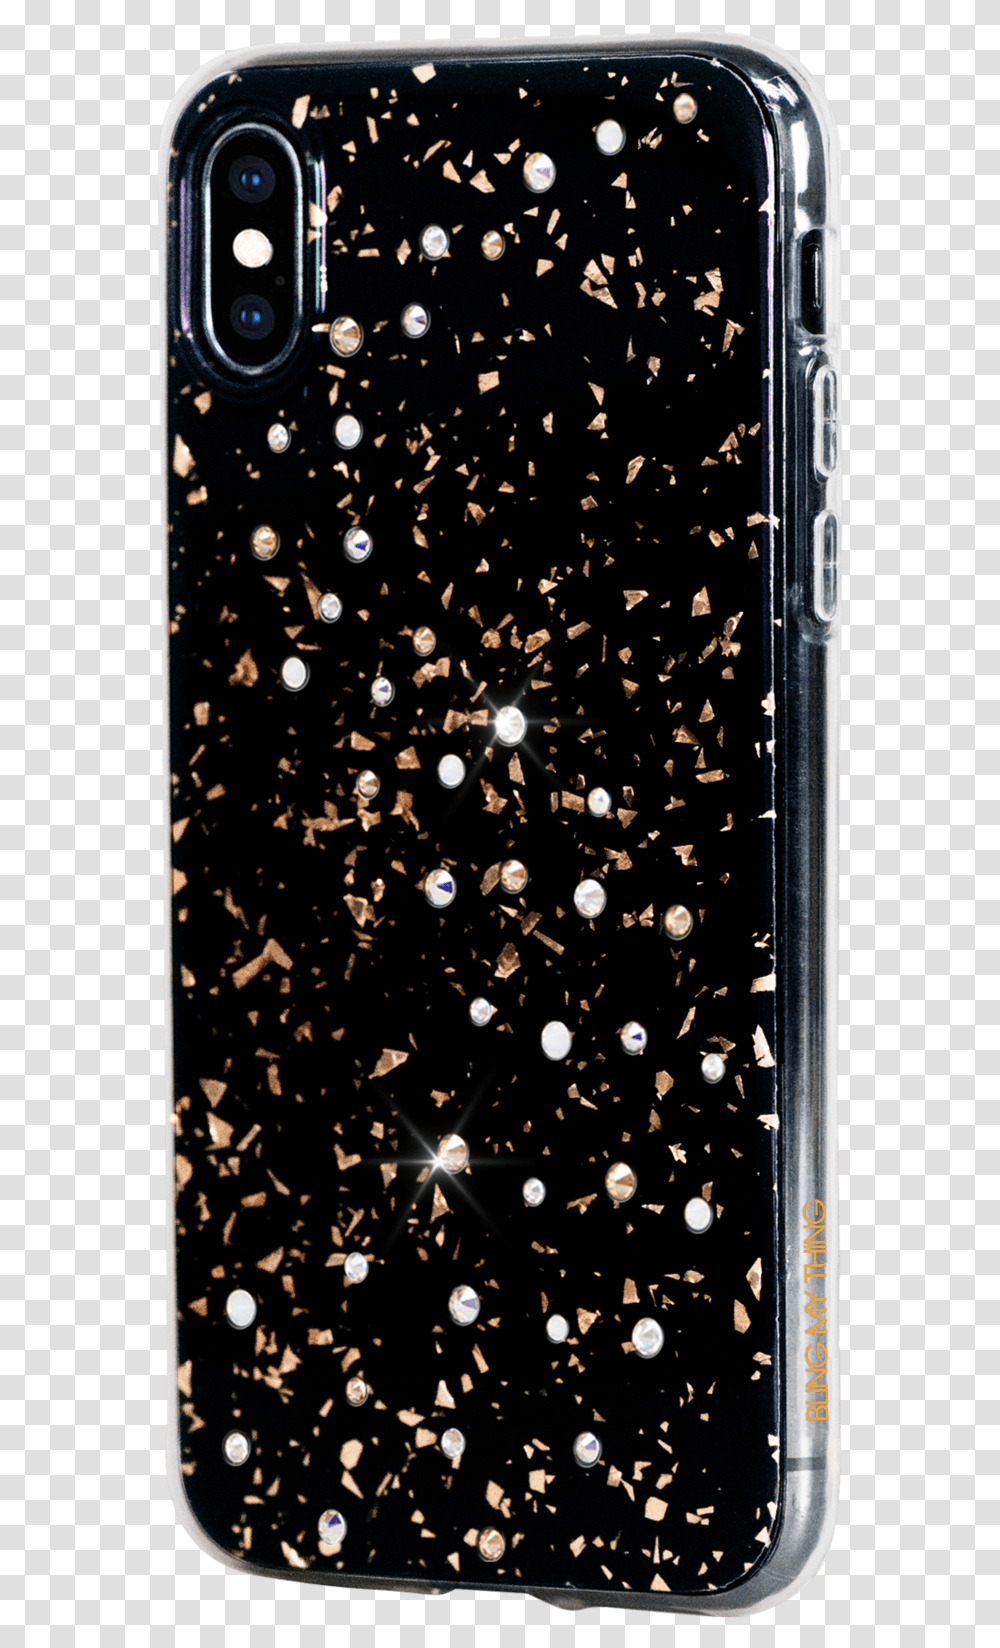 For Iphone Xs Max Iphone Xs, Confetti, Paper, Mobile Phone, Electronics Transparent Png